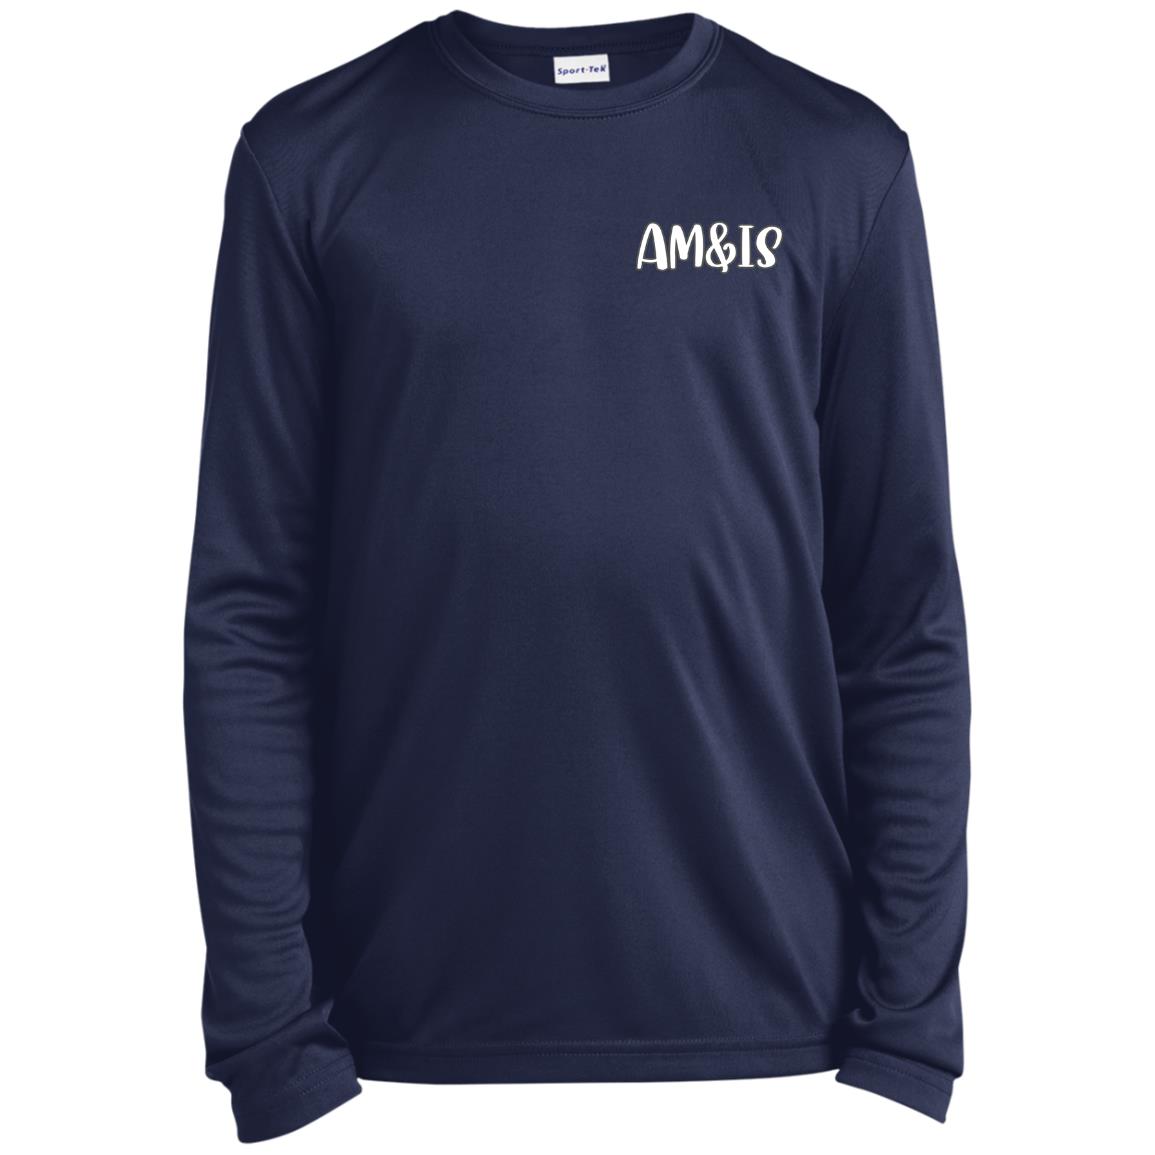 TRUE NAVY - AM&IS Activewear Youth Long Sleeve Performance Tee - kids t-shirts at TFC&H Co.